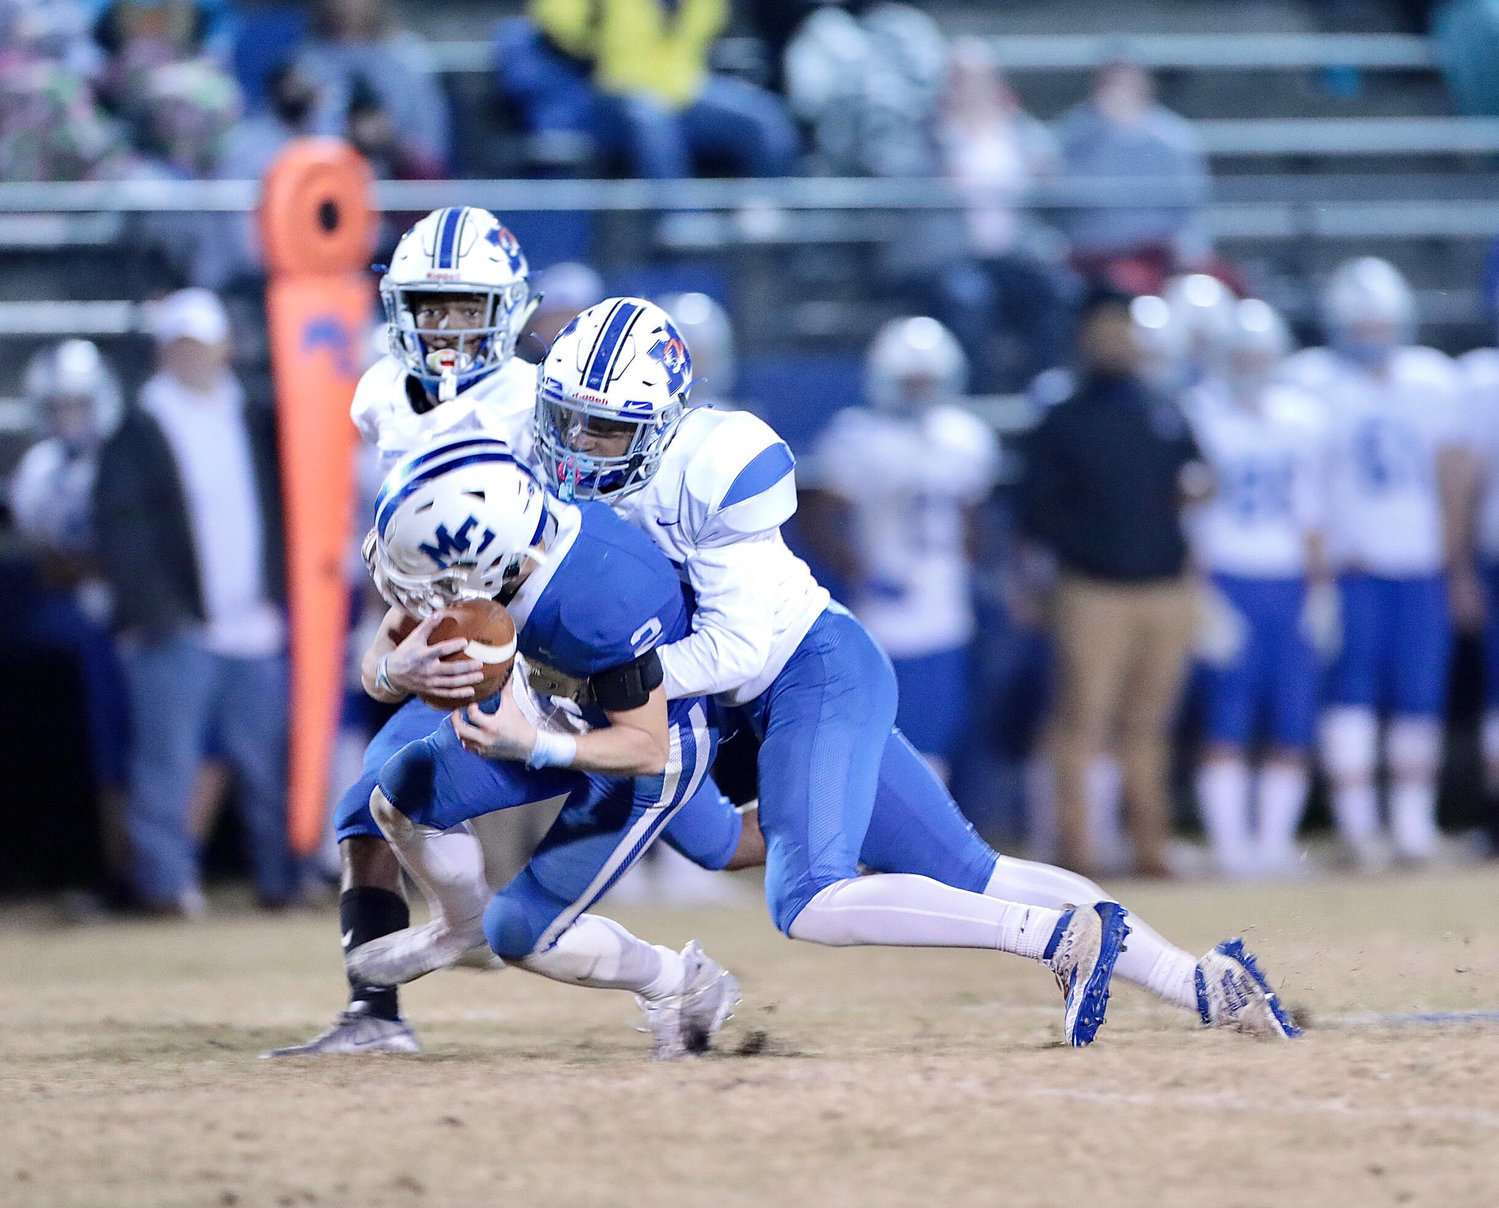 Marshall County’s Lamrion Pierce comes up to make a solid tackle on a Macon County receiver.